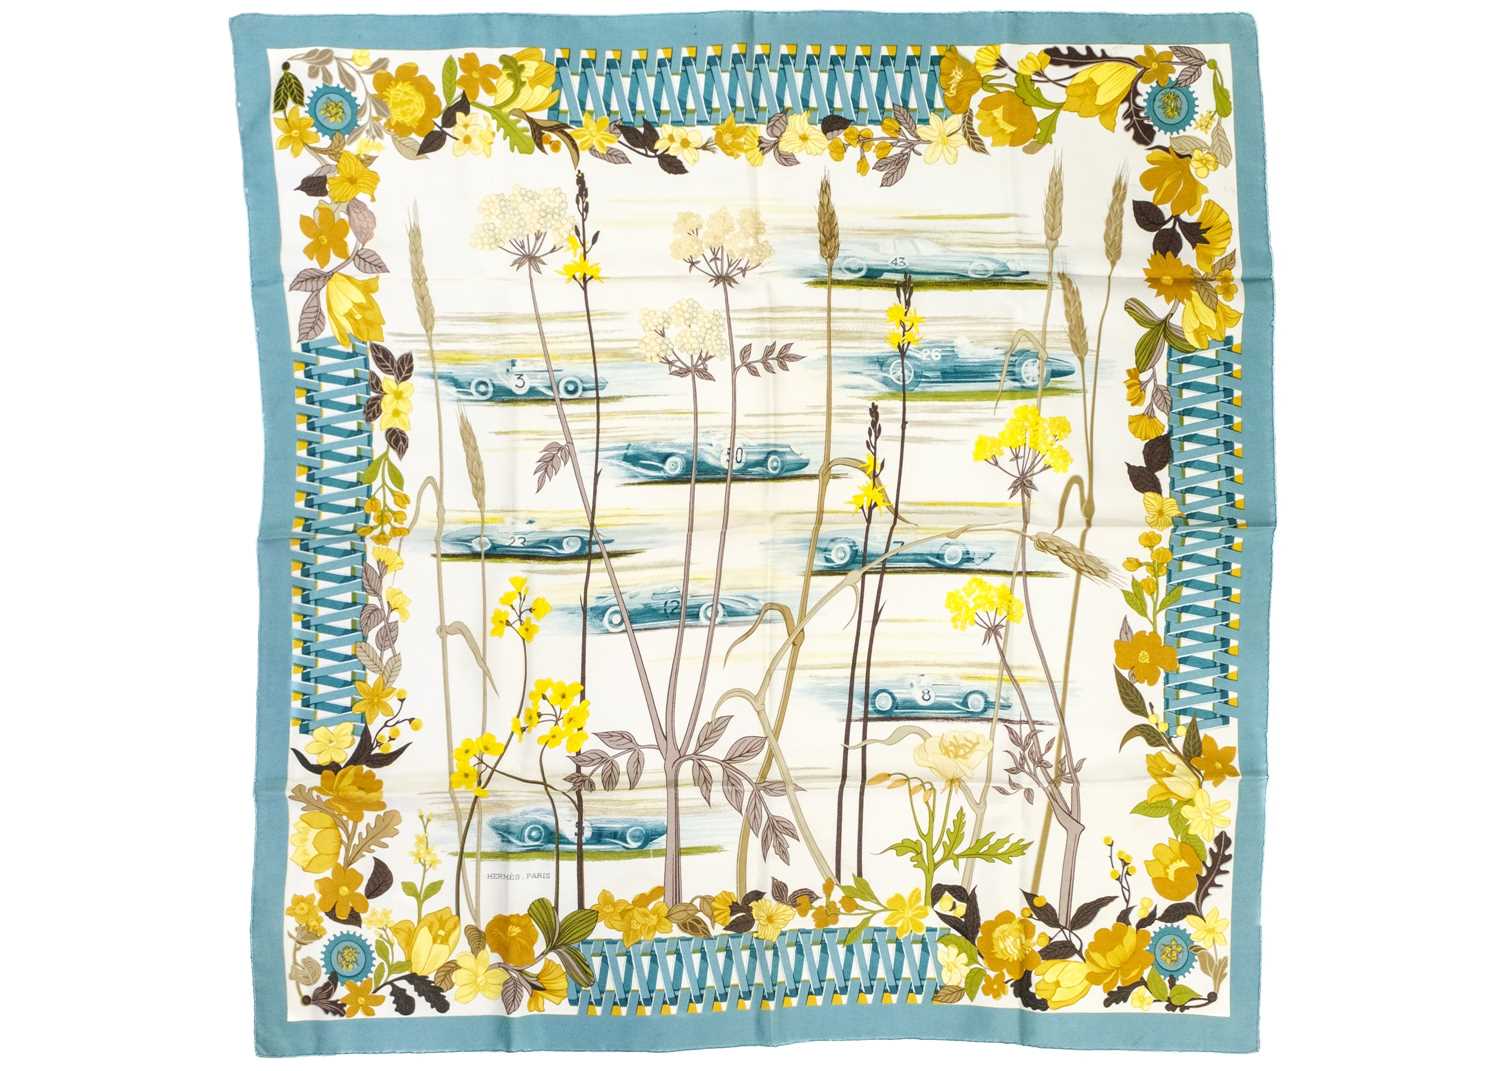 HERMES - A printed silk scarf 'Les Bolides'.